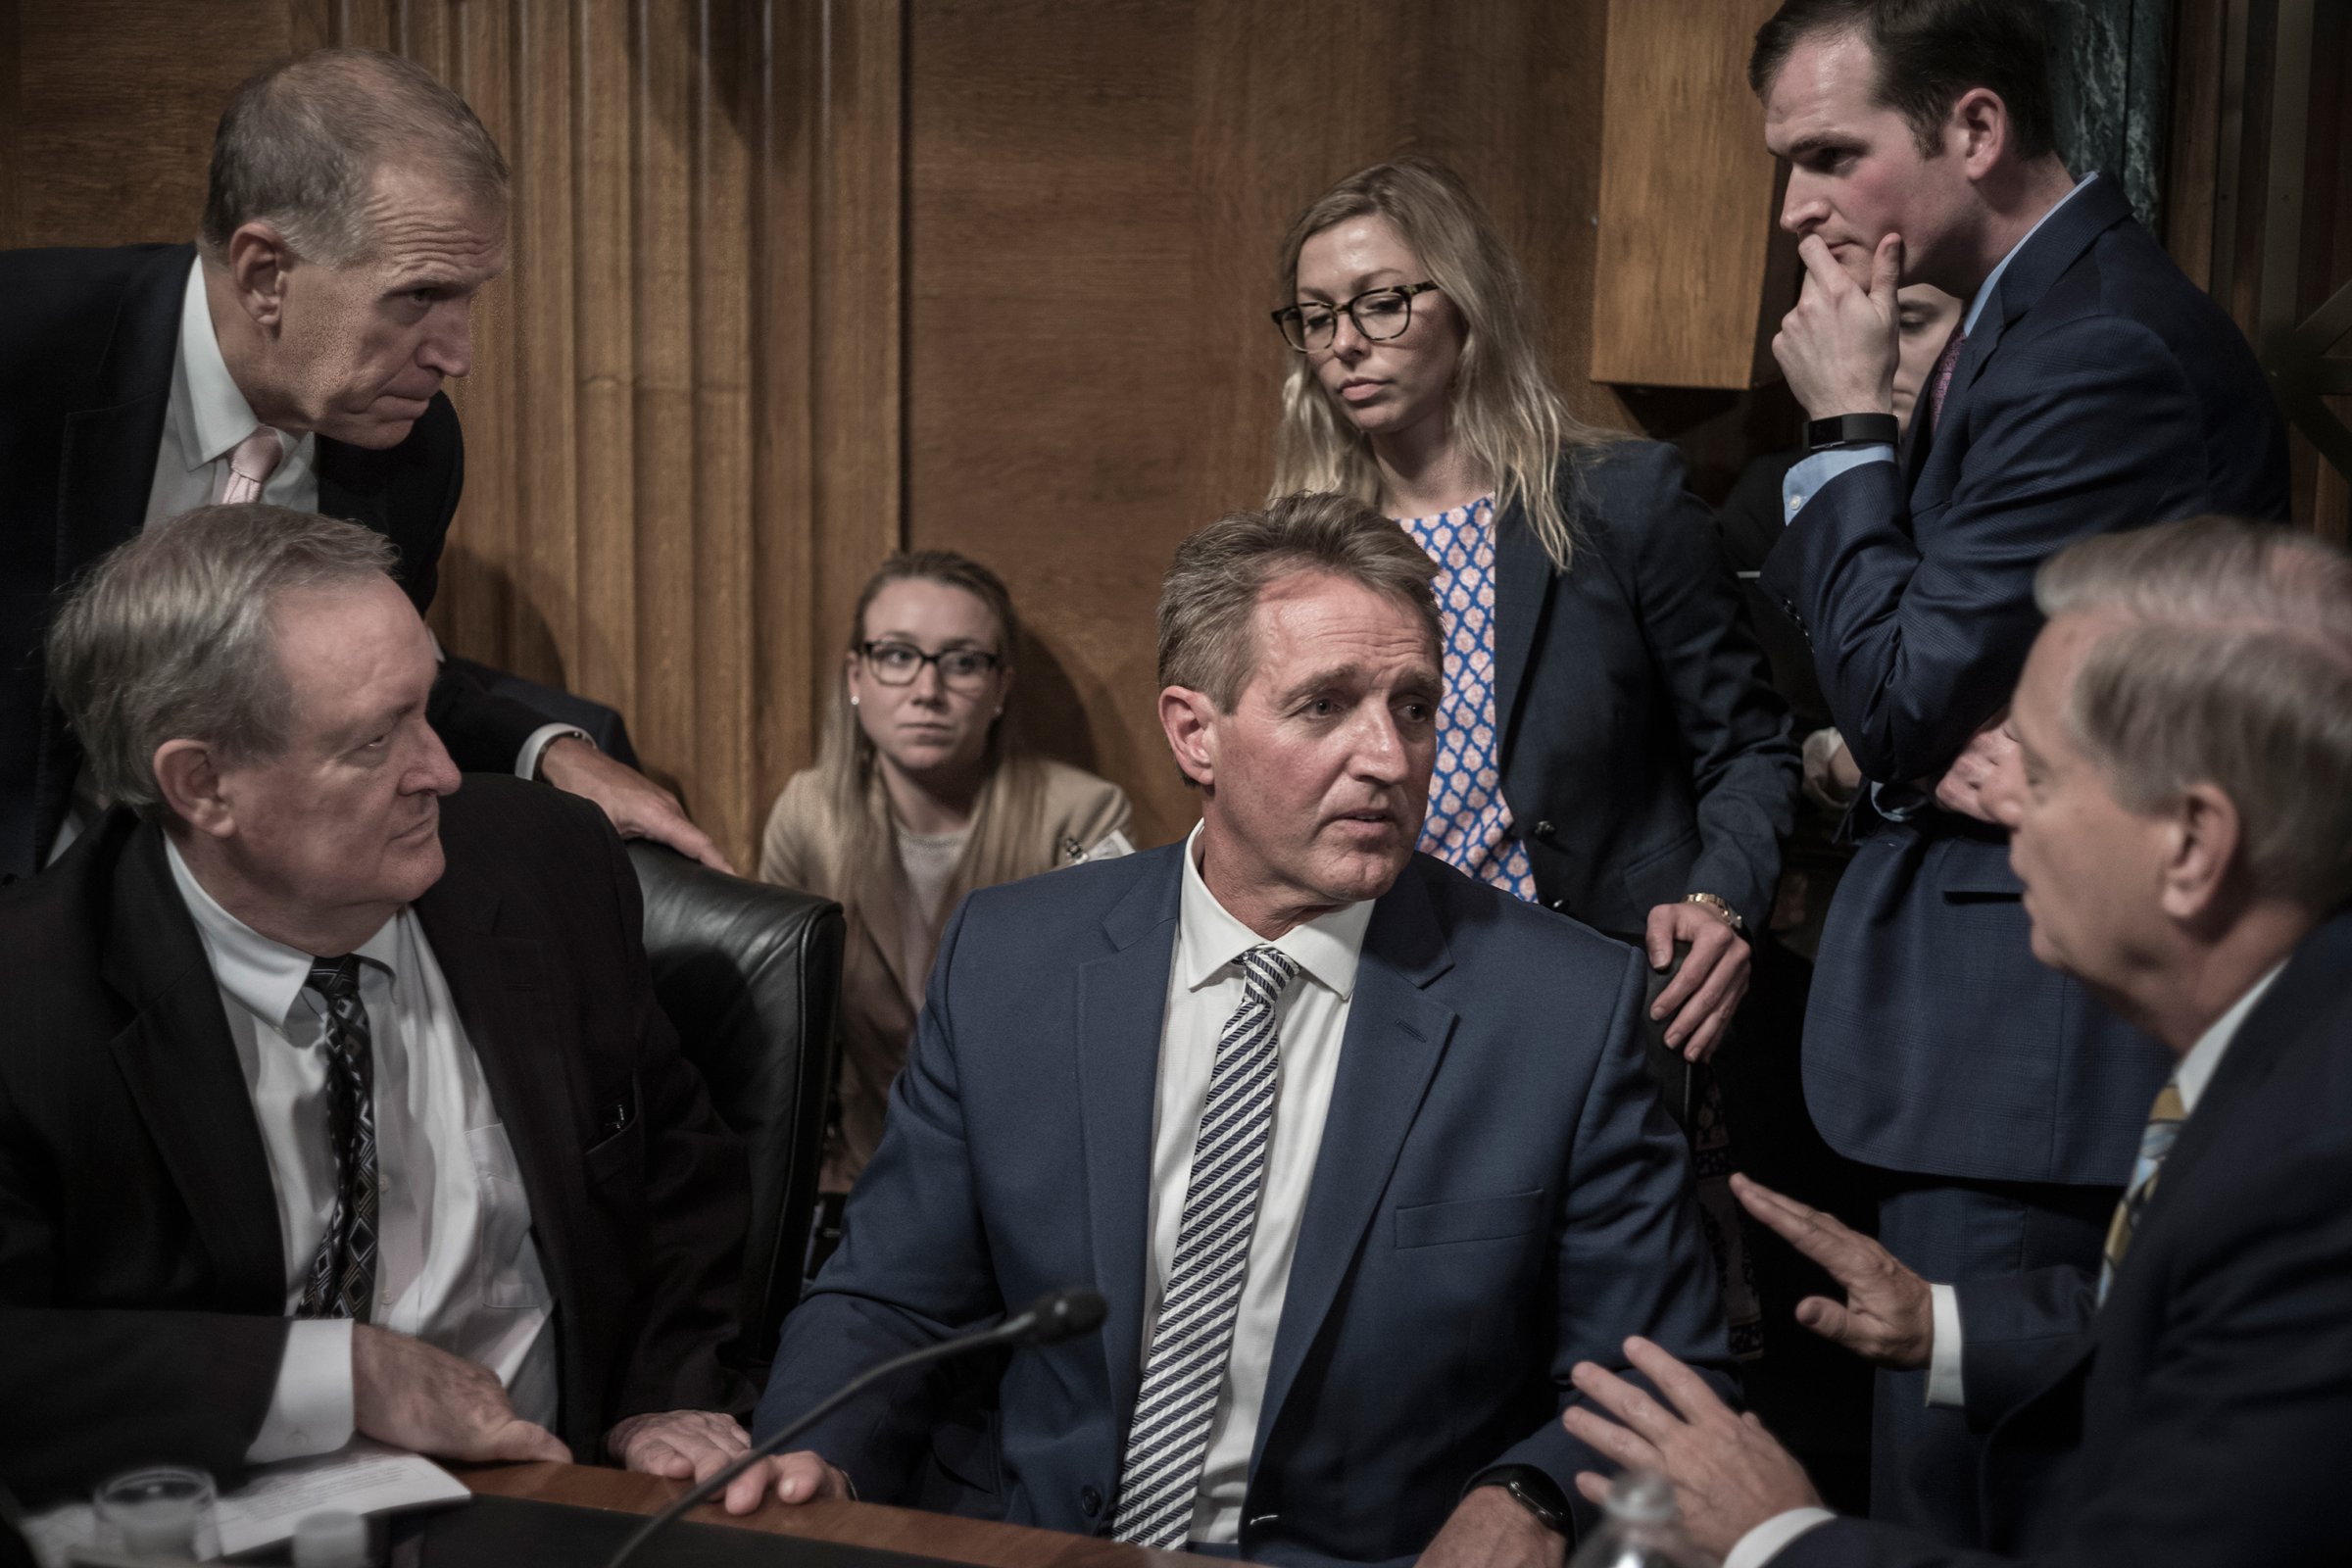 Jeff Flake, center, listens to fellow GOP Senator Lindsey Graham, right, on Sept. 28, moments after Flake called for a delay in Brett Kavanaugh’s Supreme Court confirmation